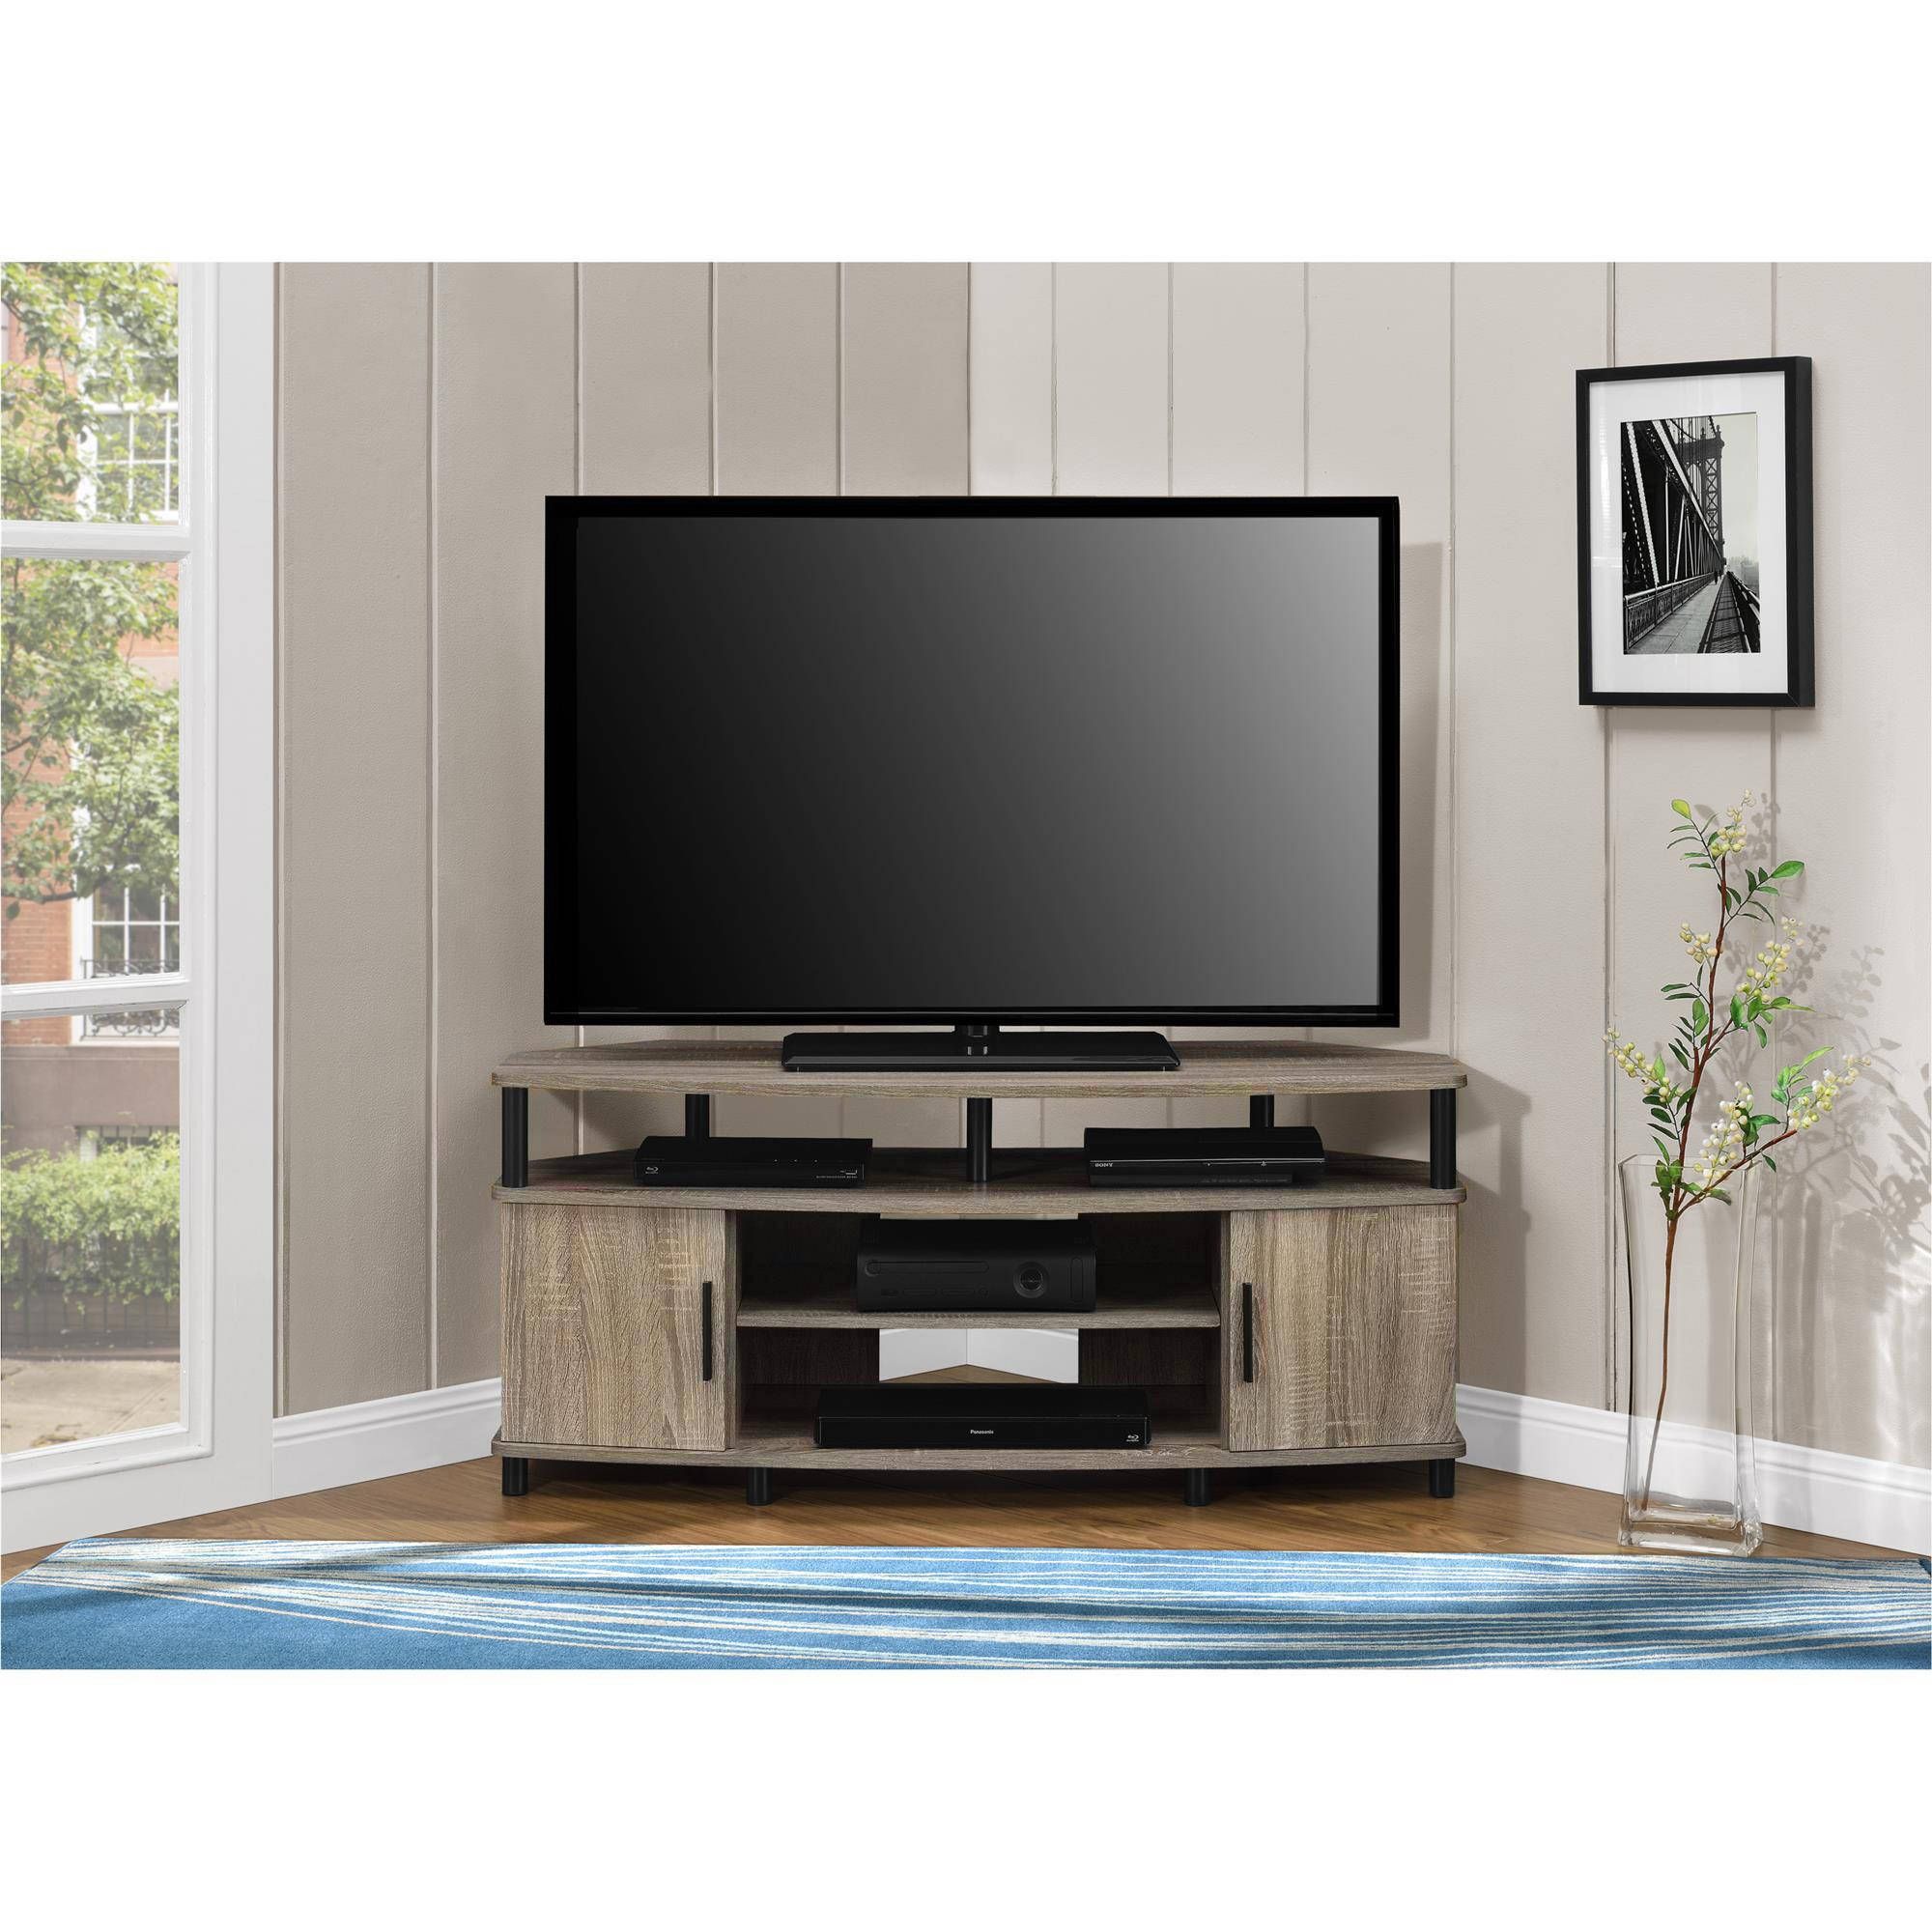 Corner Tv Stand Media Console For Flat Screens Sonoma Oak Throughout Corner Tv Cabinets For Flat Screens (View 2 of 15)